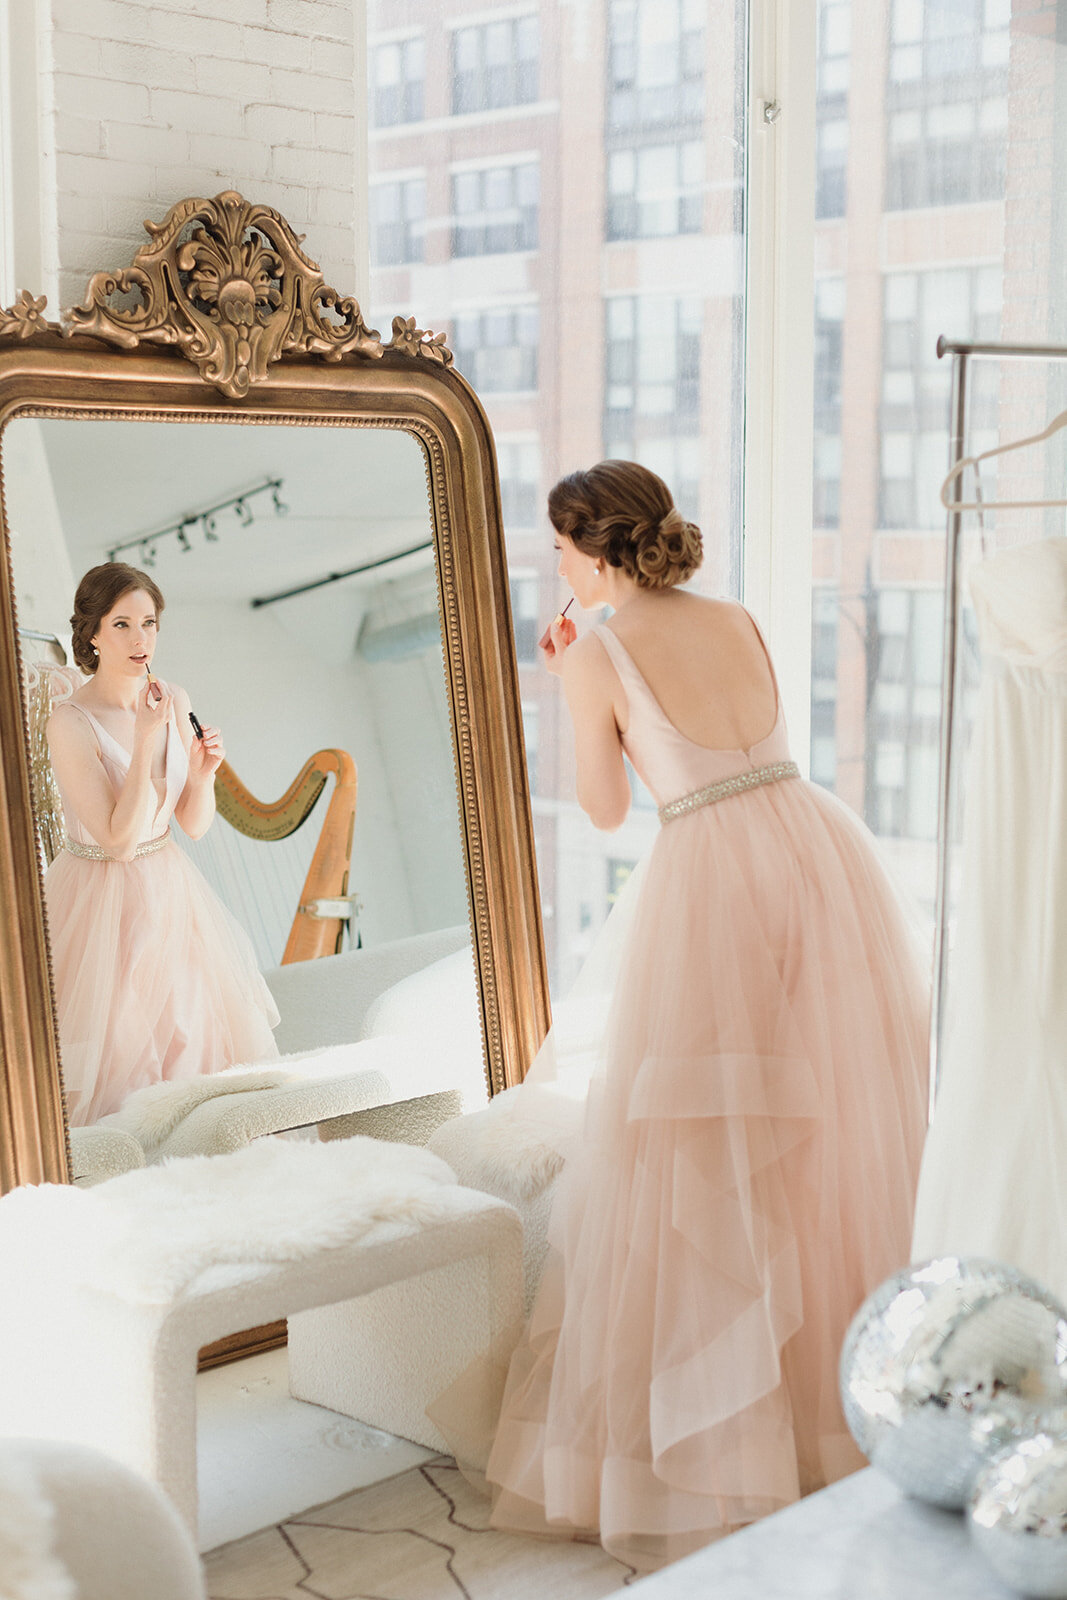 light skinned woman in pale pink gown is leaning toward a large gilded mirror and applying lip gloss. Her harp can be seen in the reflection in the mirror.